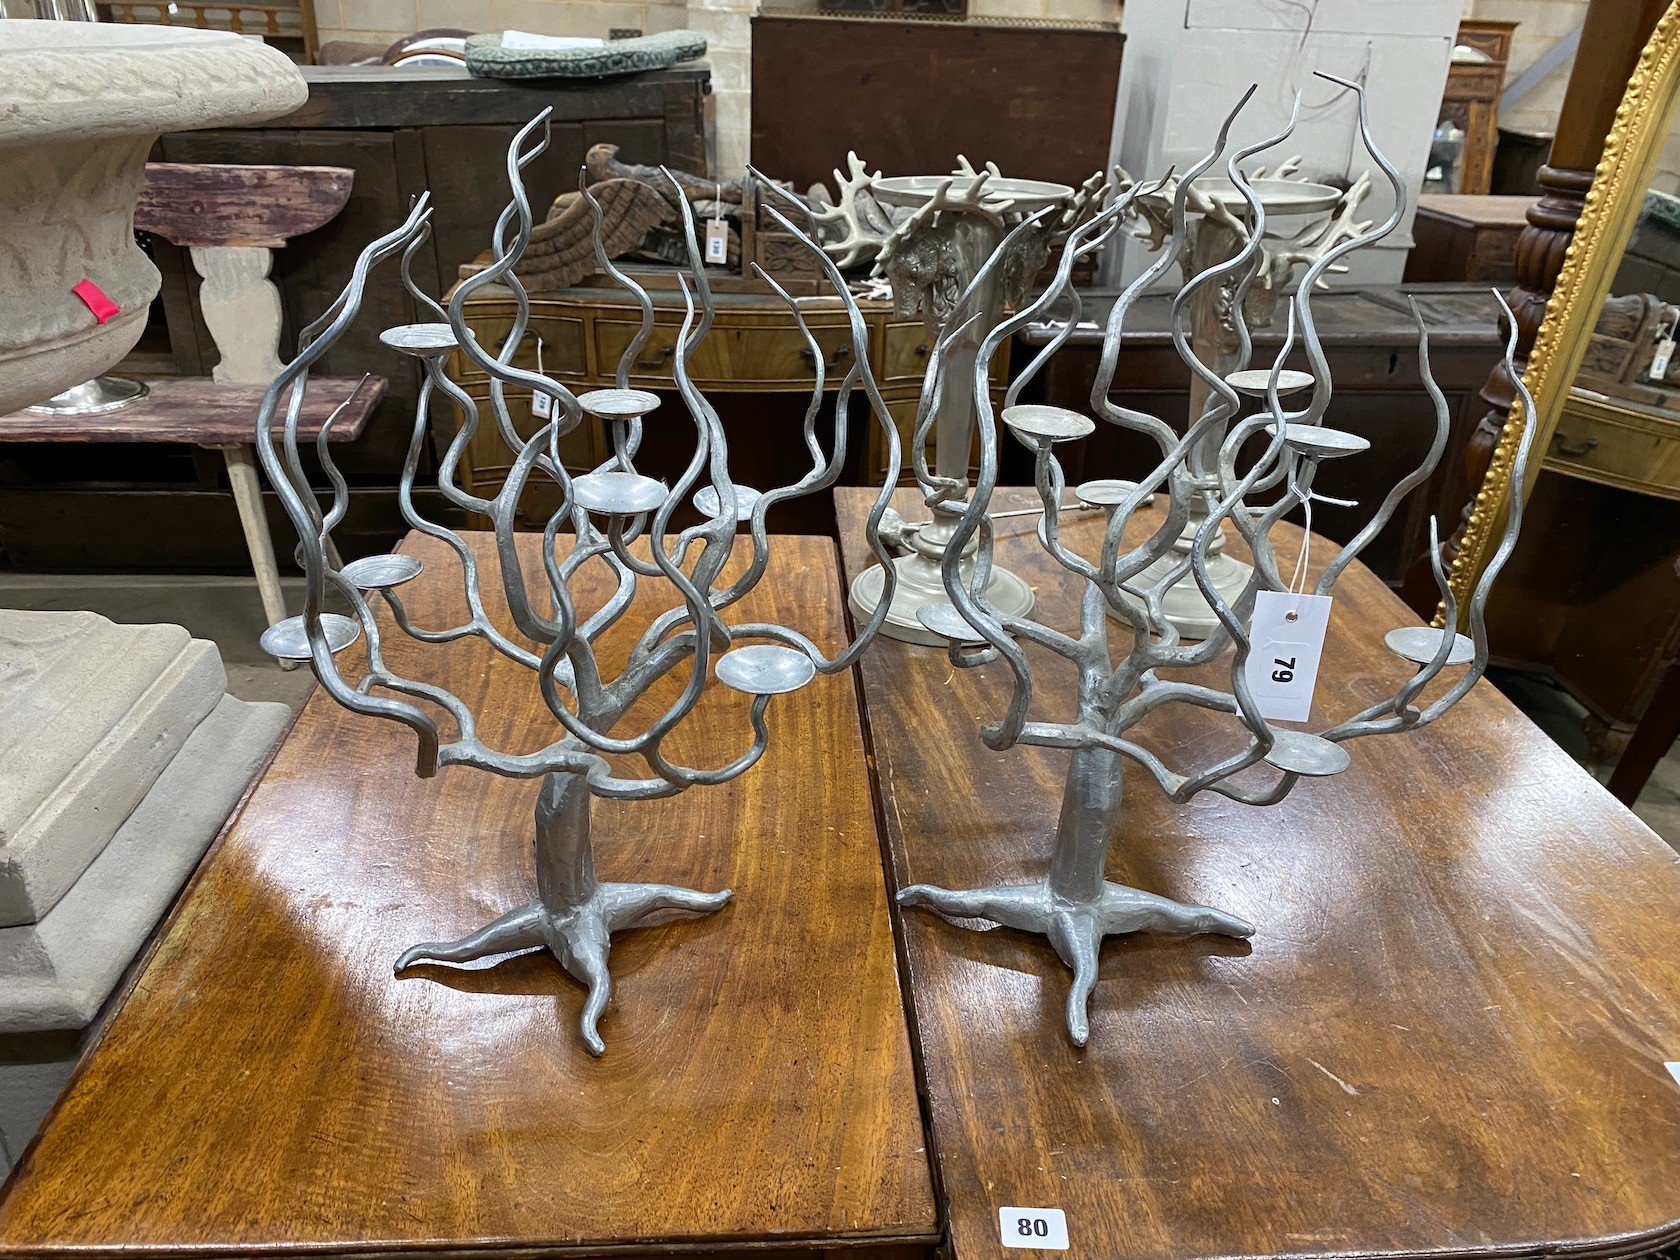 A pair of Michael Aram style contemporary metal tree candle holders, height 49cm